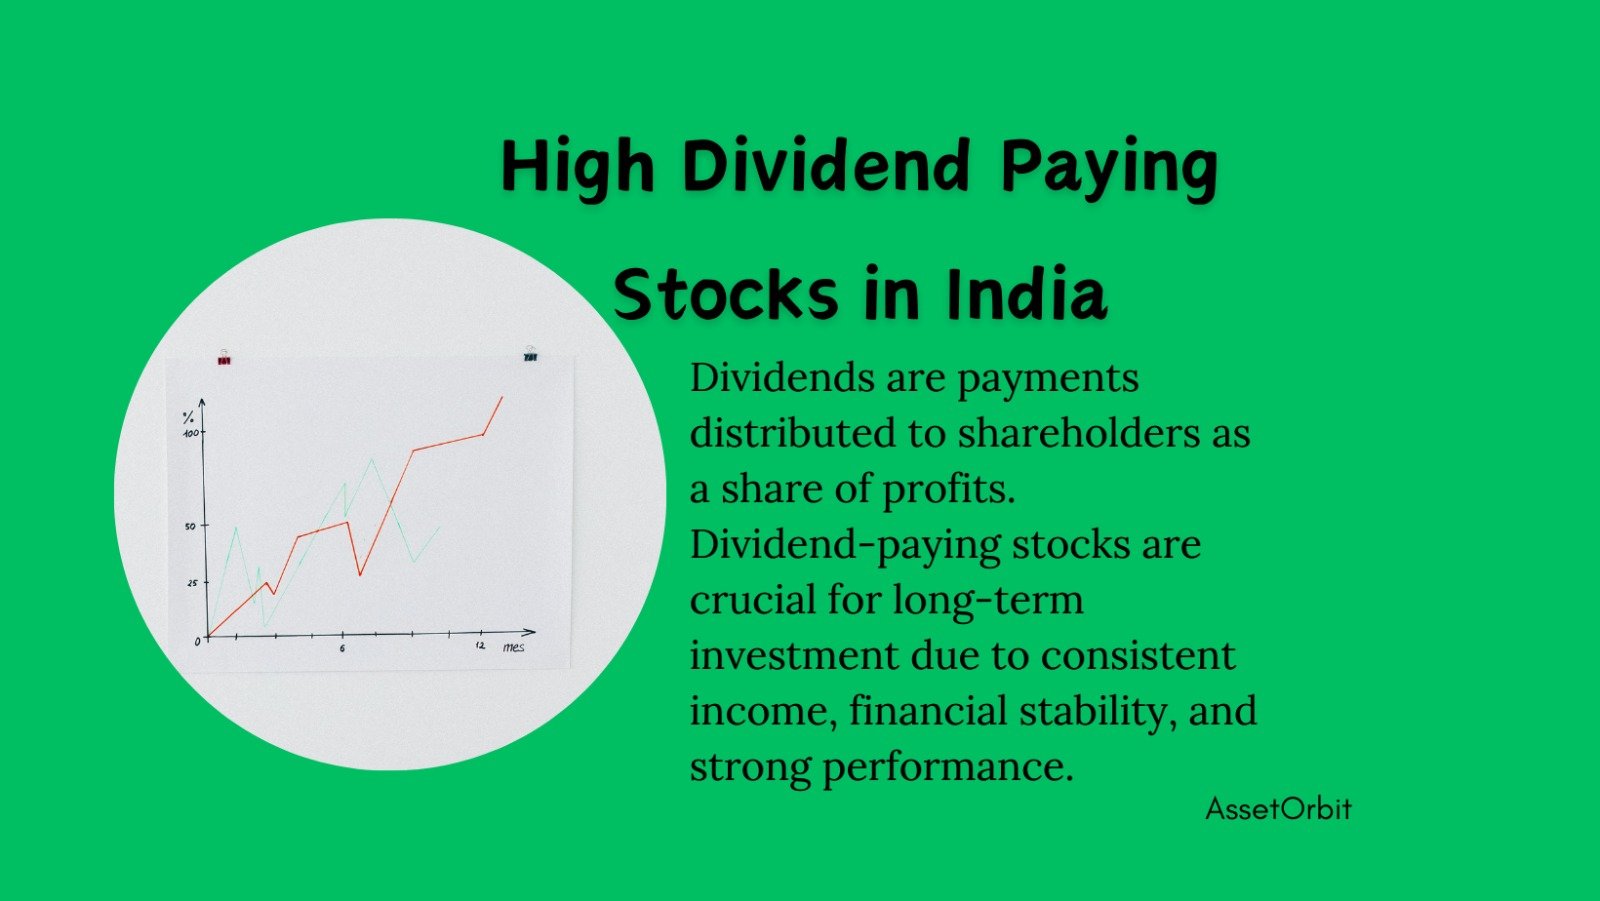 High Dividend Paying Stocks in India for Long-term Investment